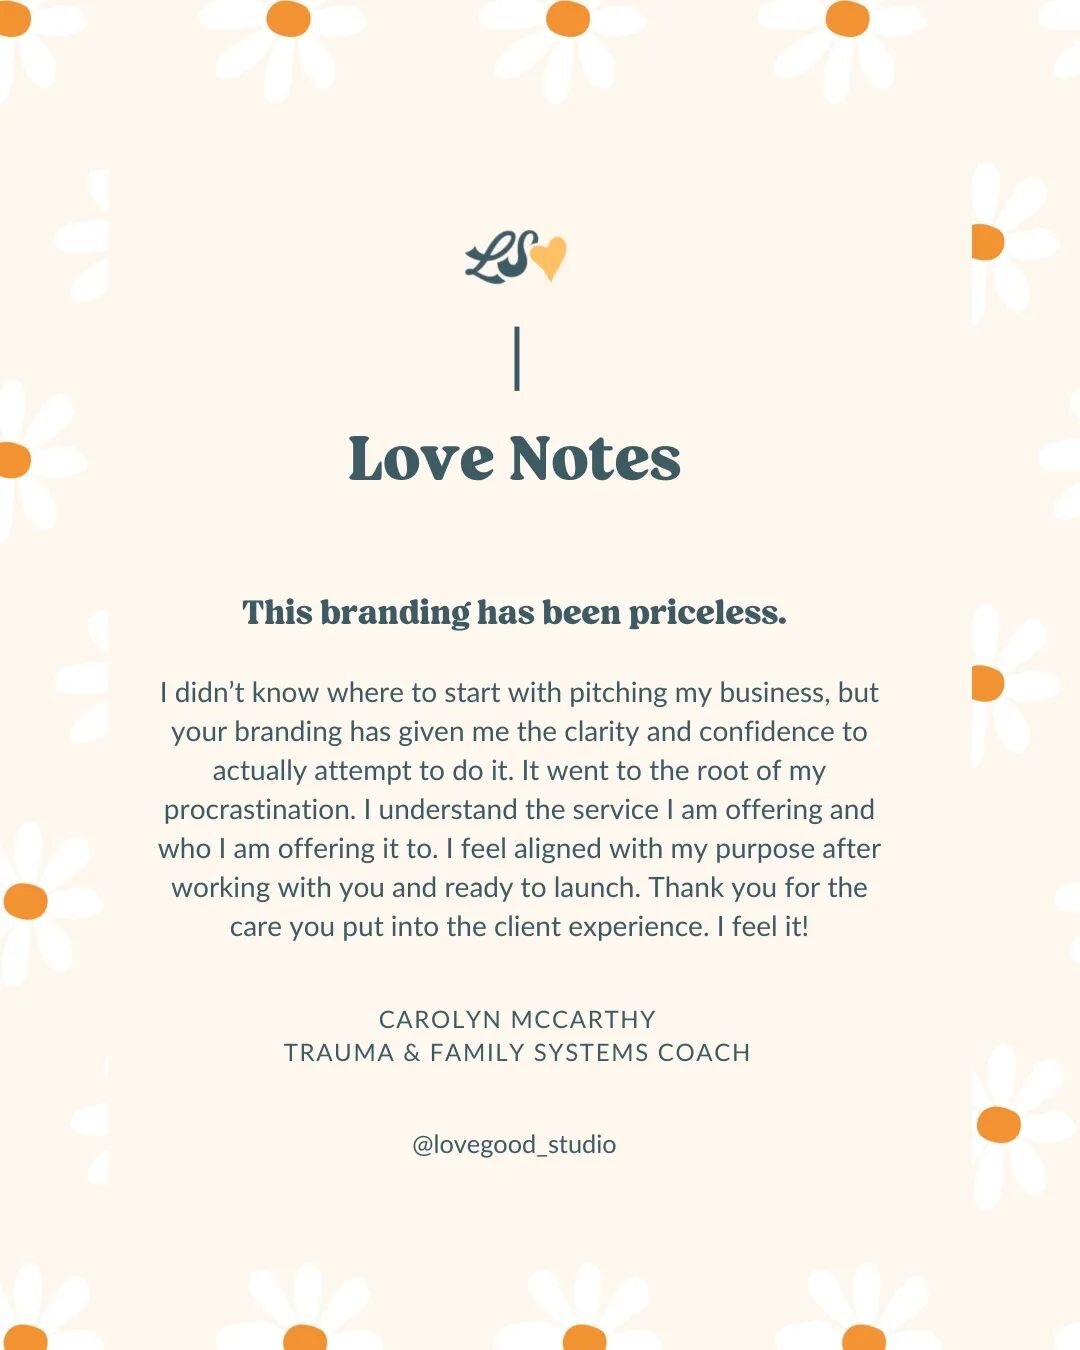 I mean...😭🥰 And people who know me know I'm not exaggerating when I say there were actual tears in my eyes reading this feedback. 

No words 🌼

#womenentrepreneurs #womeninbusiness #womensolopreneur #womensupportingwomen #solopreneurship #solopren